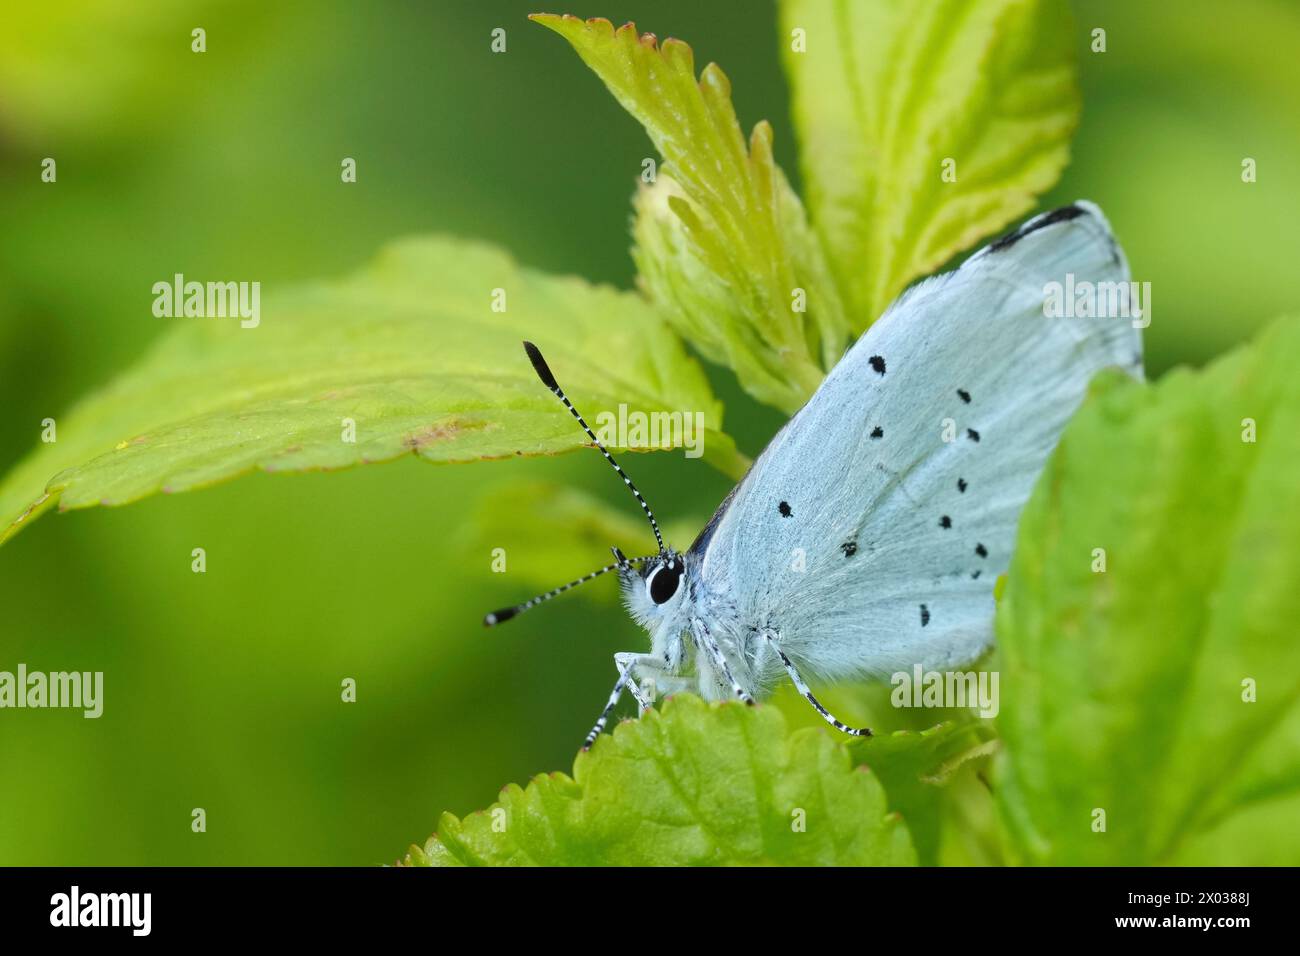 Detailed closeup on a small Holly blue butterfly, Celastrina argiolus, hiding between green leafs of a shrub Stock Photo